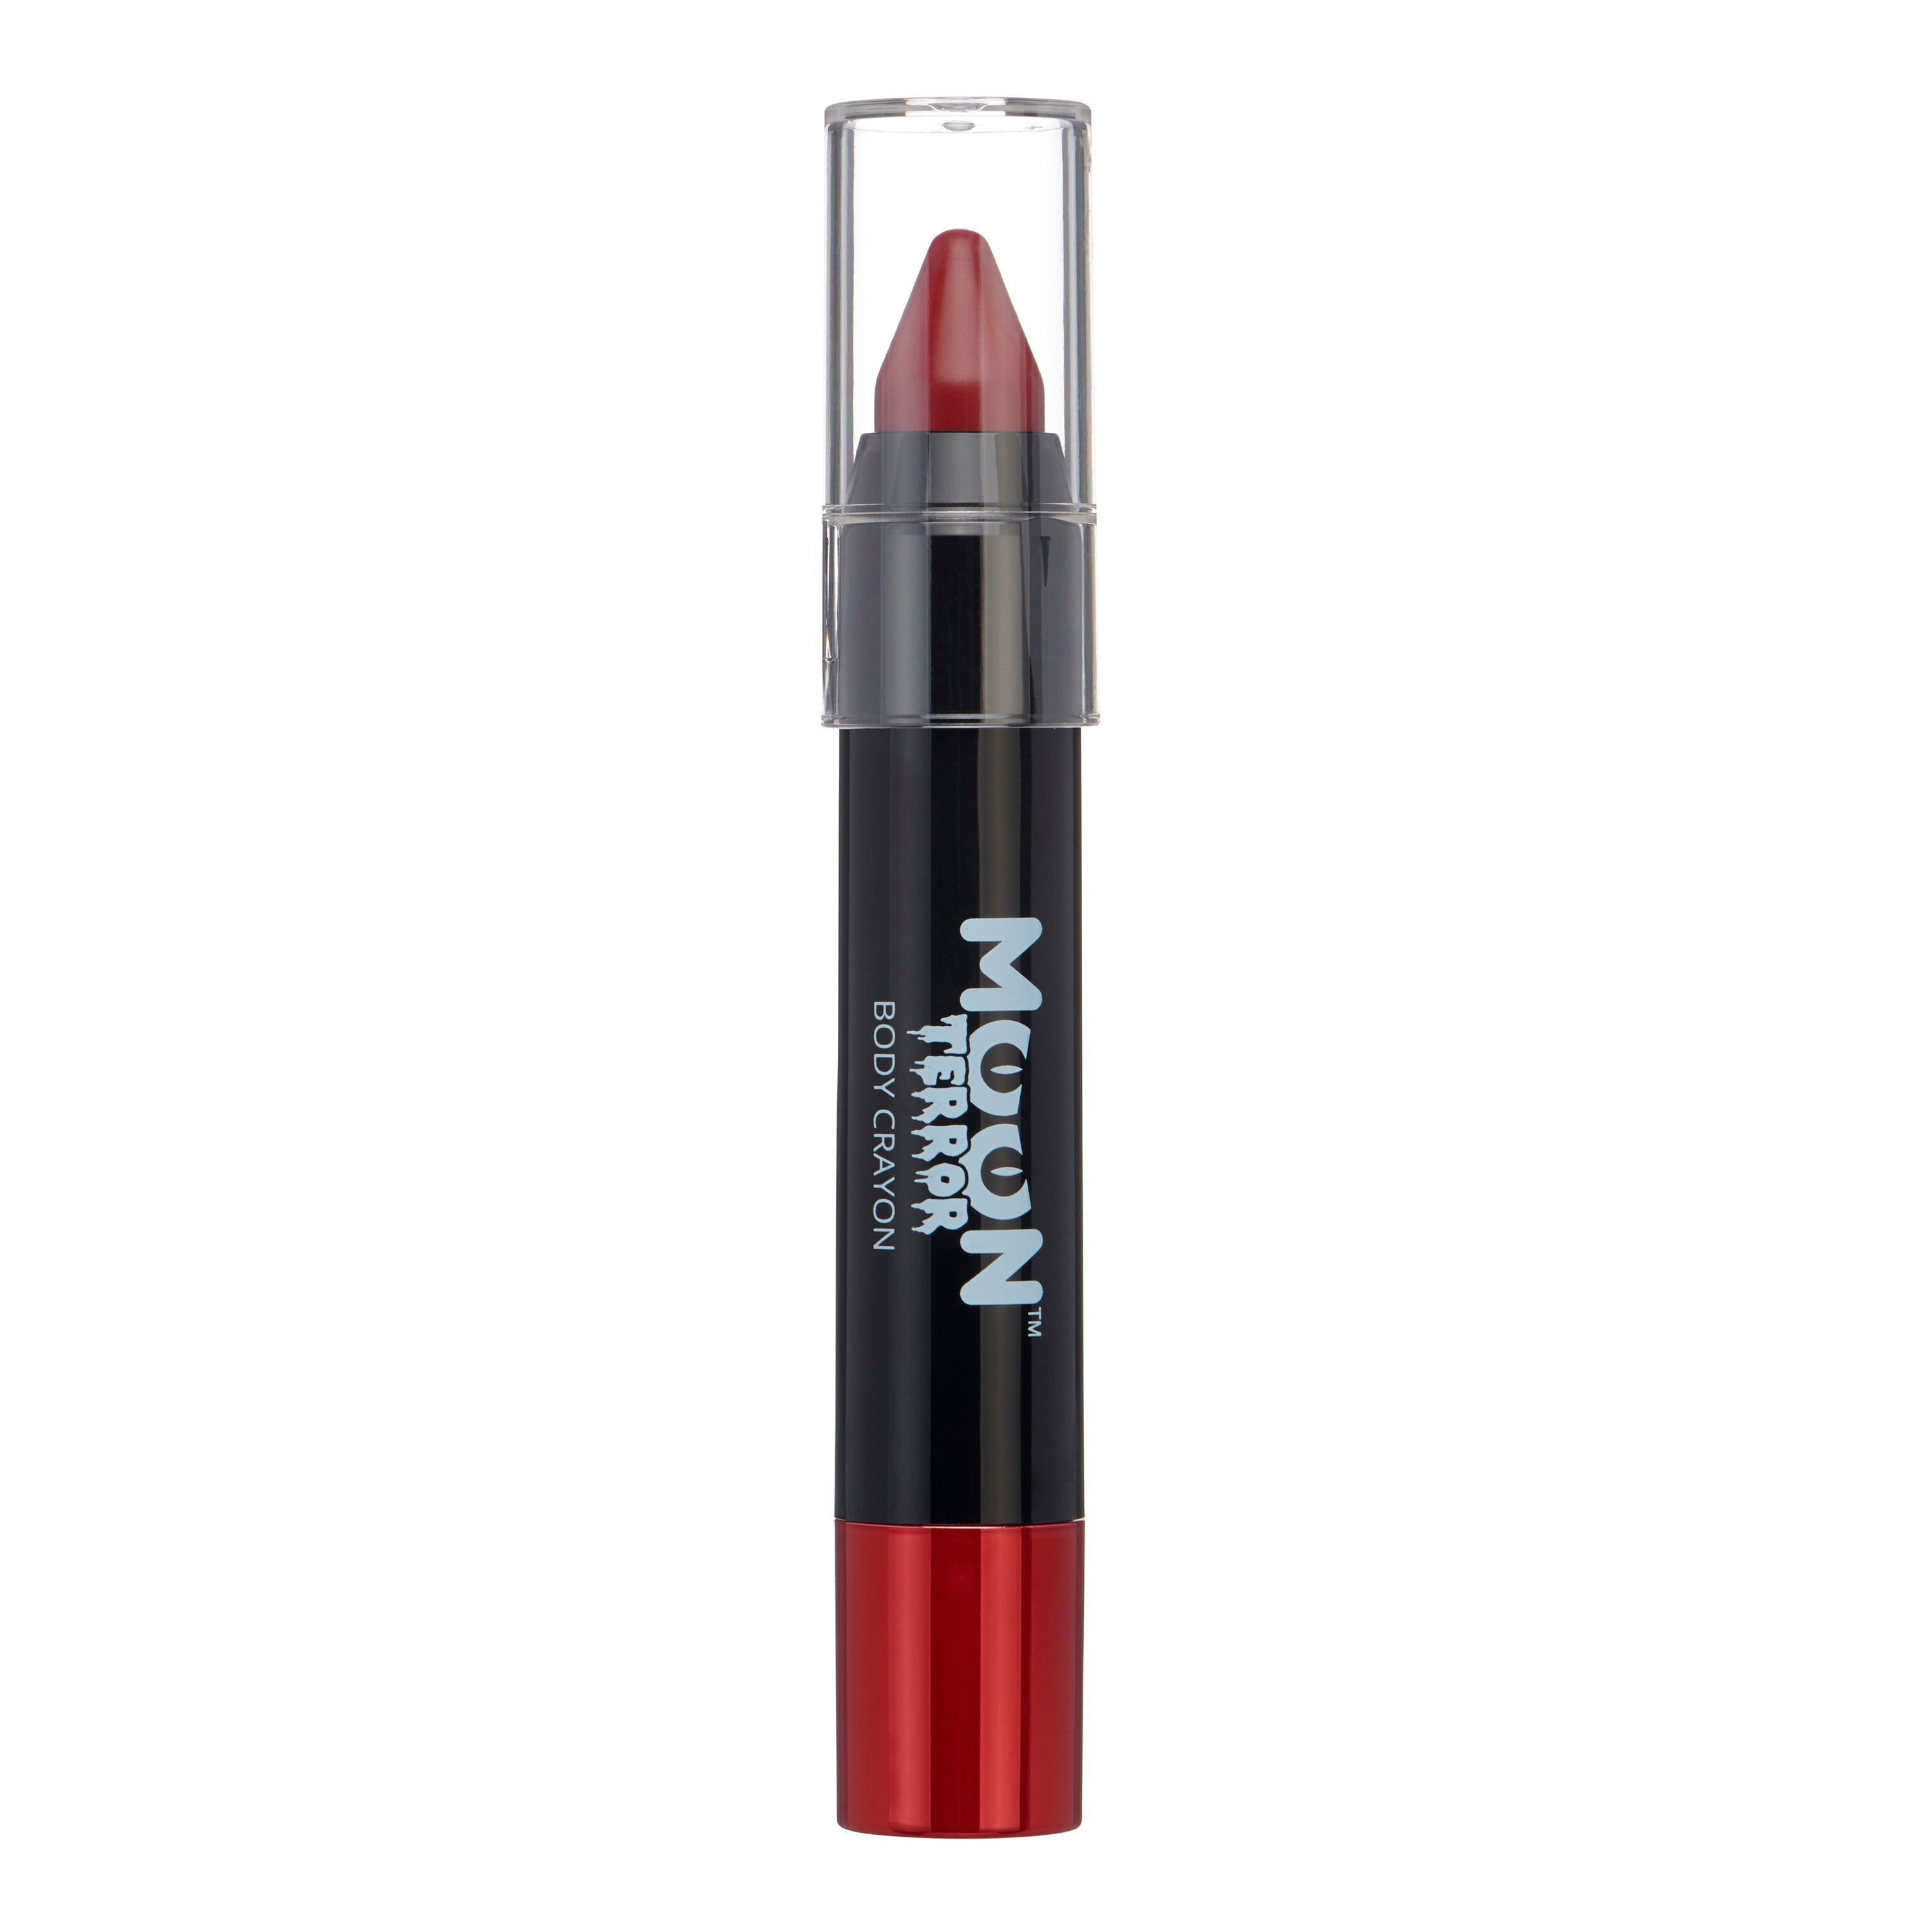 Blood Red - Terror Face & Body Crayon, 3.5g. Cosmetically certified, FDA & Health Canada compliant and cruelty free.